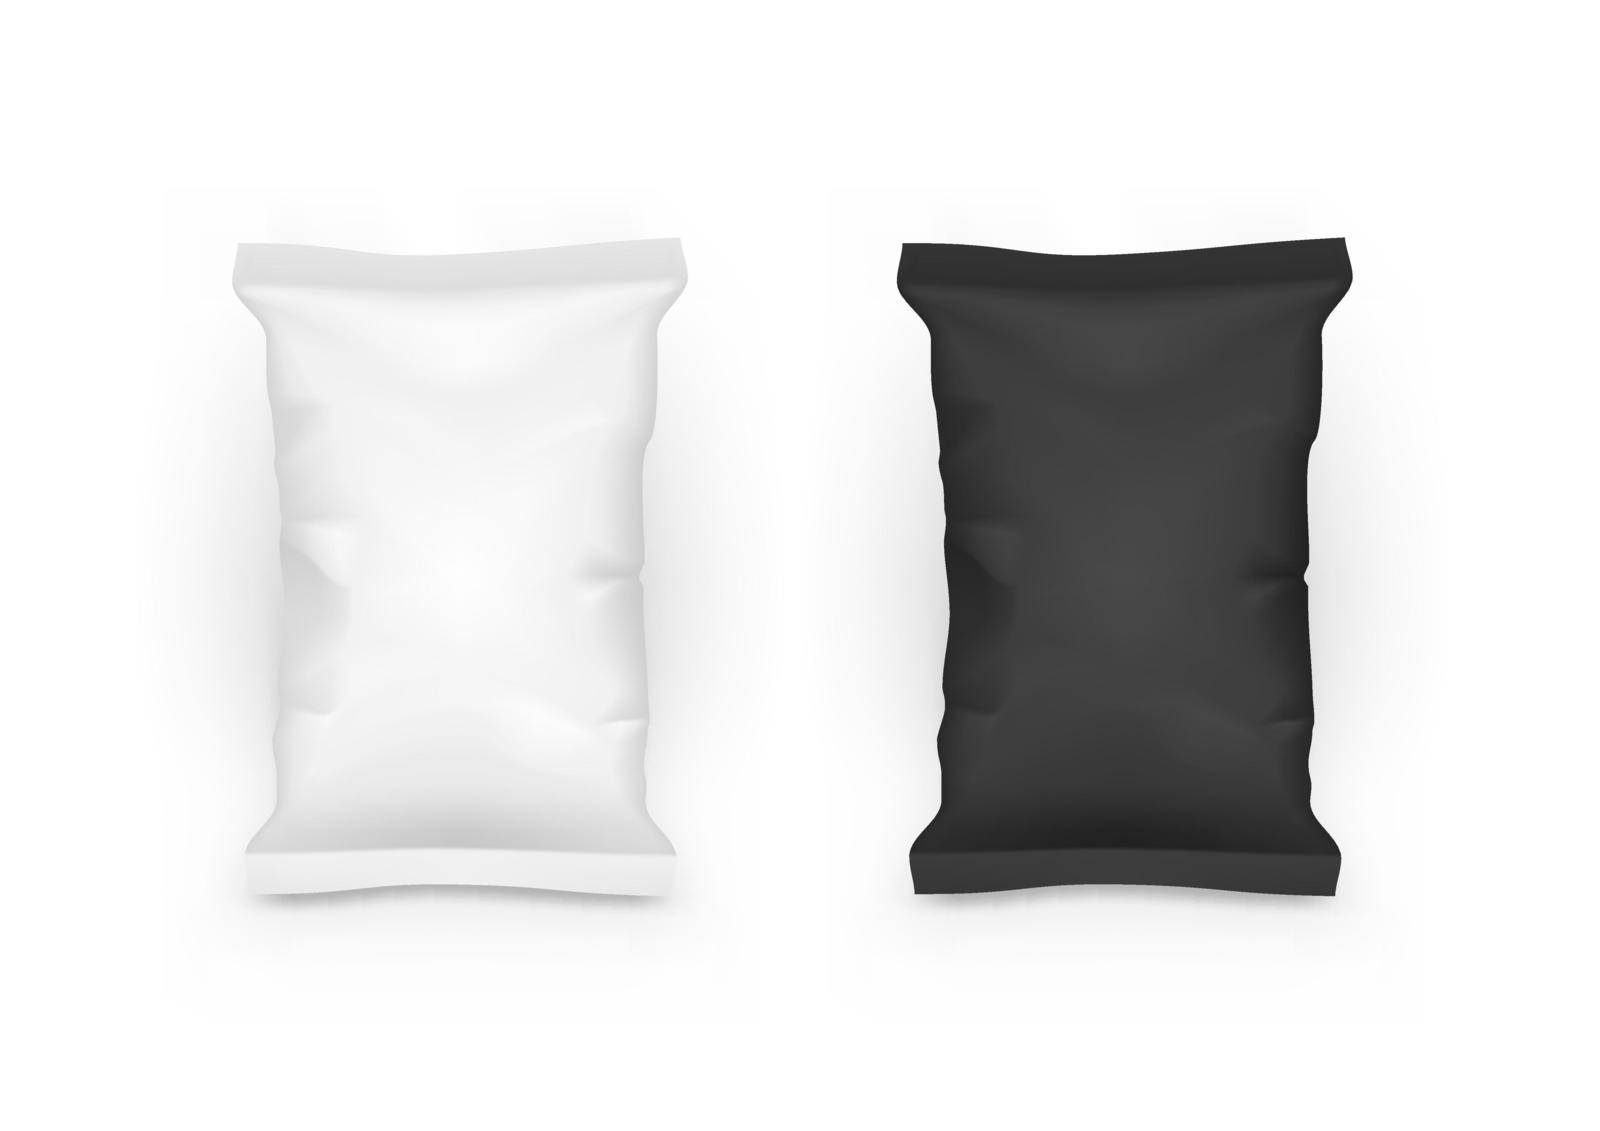 Clear White Pillow Full Bag Packaging With Shadow by VectorThings